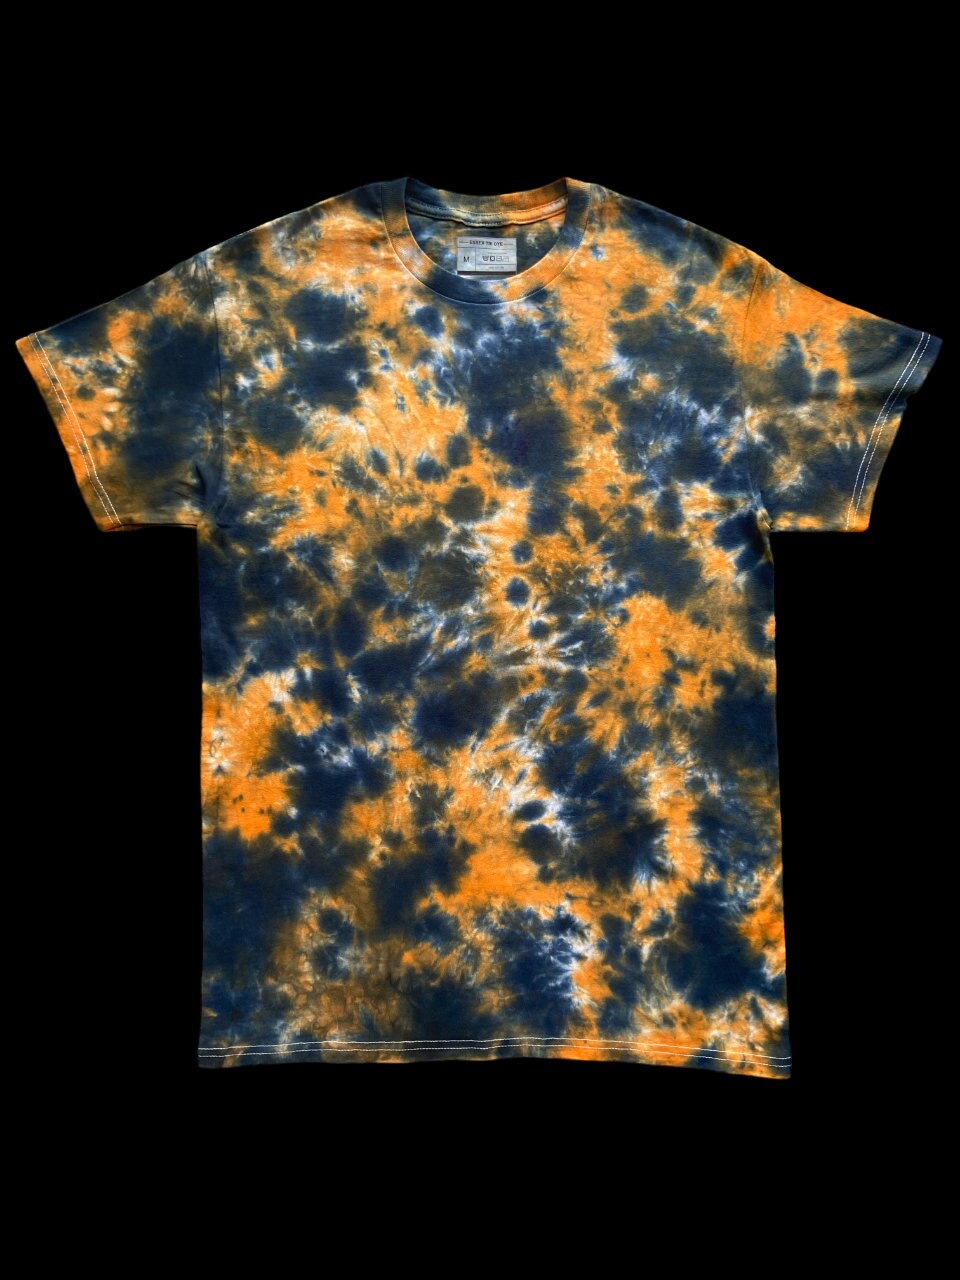 Discover Orange and Black Scrunch Tie Dye T-Shirt, Adult, Unisex, S, M, L, XL, 2XL, 3XL, 4XL, 5XL, Dyed in the UK, Gift